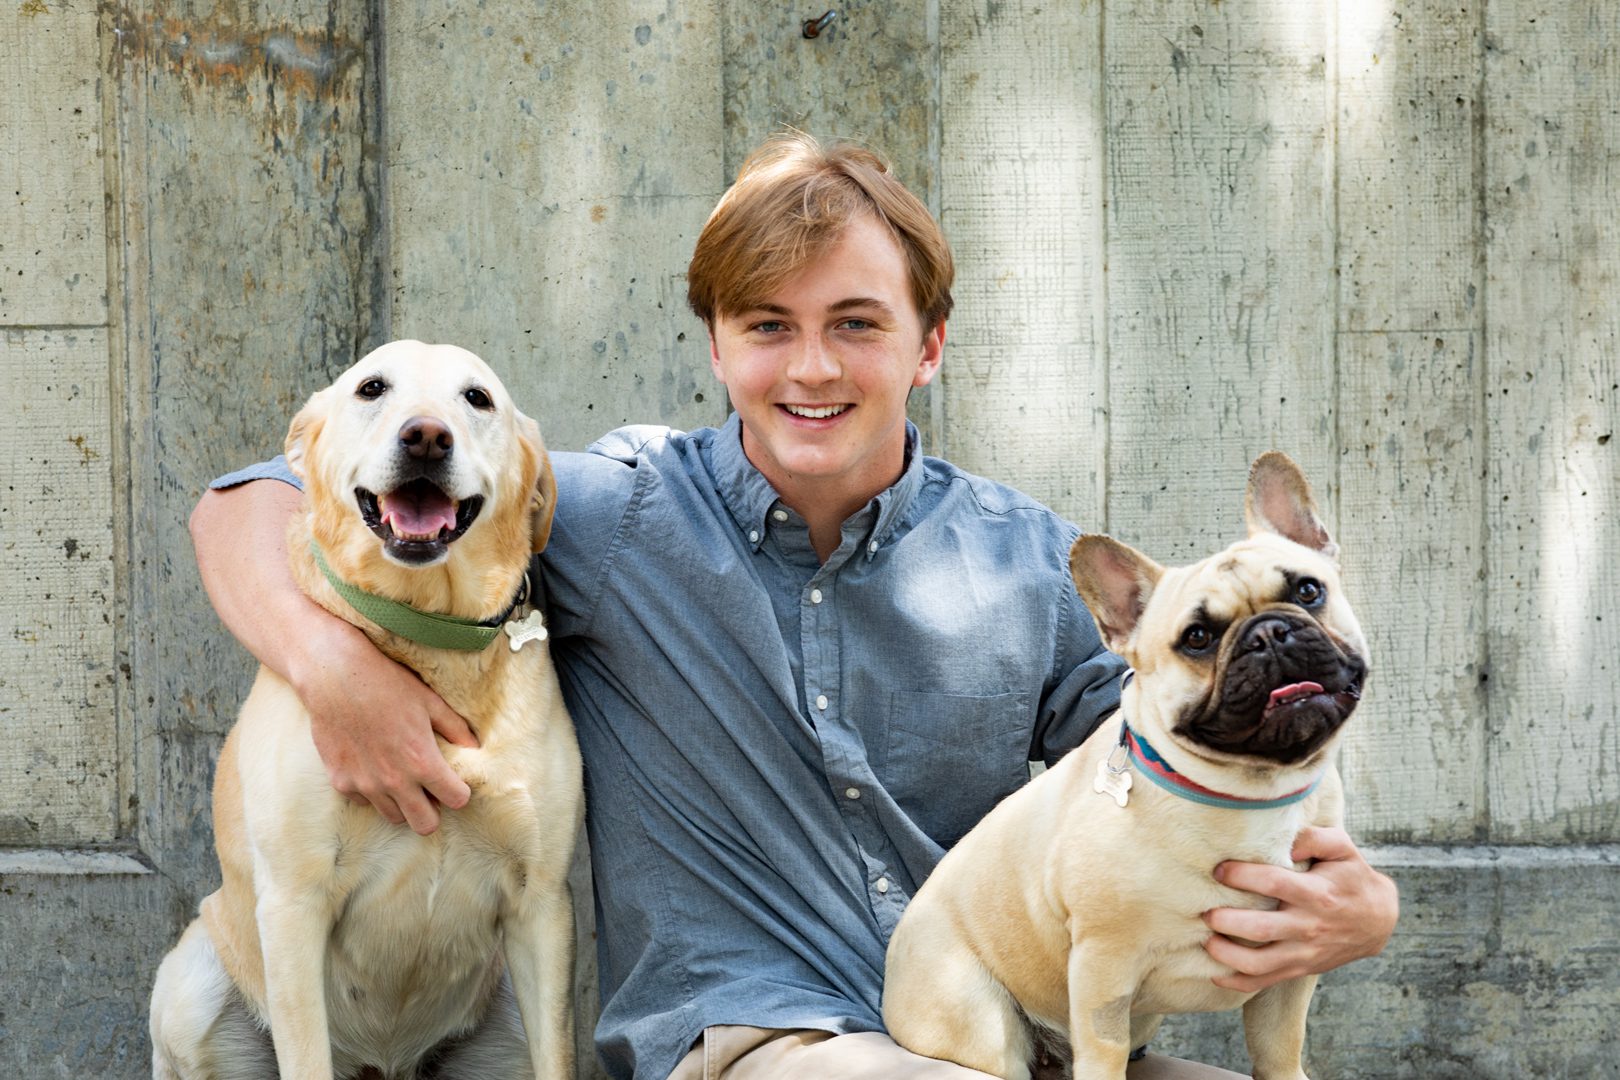 A man sitting next to two dogs in front of a wall.